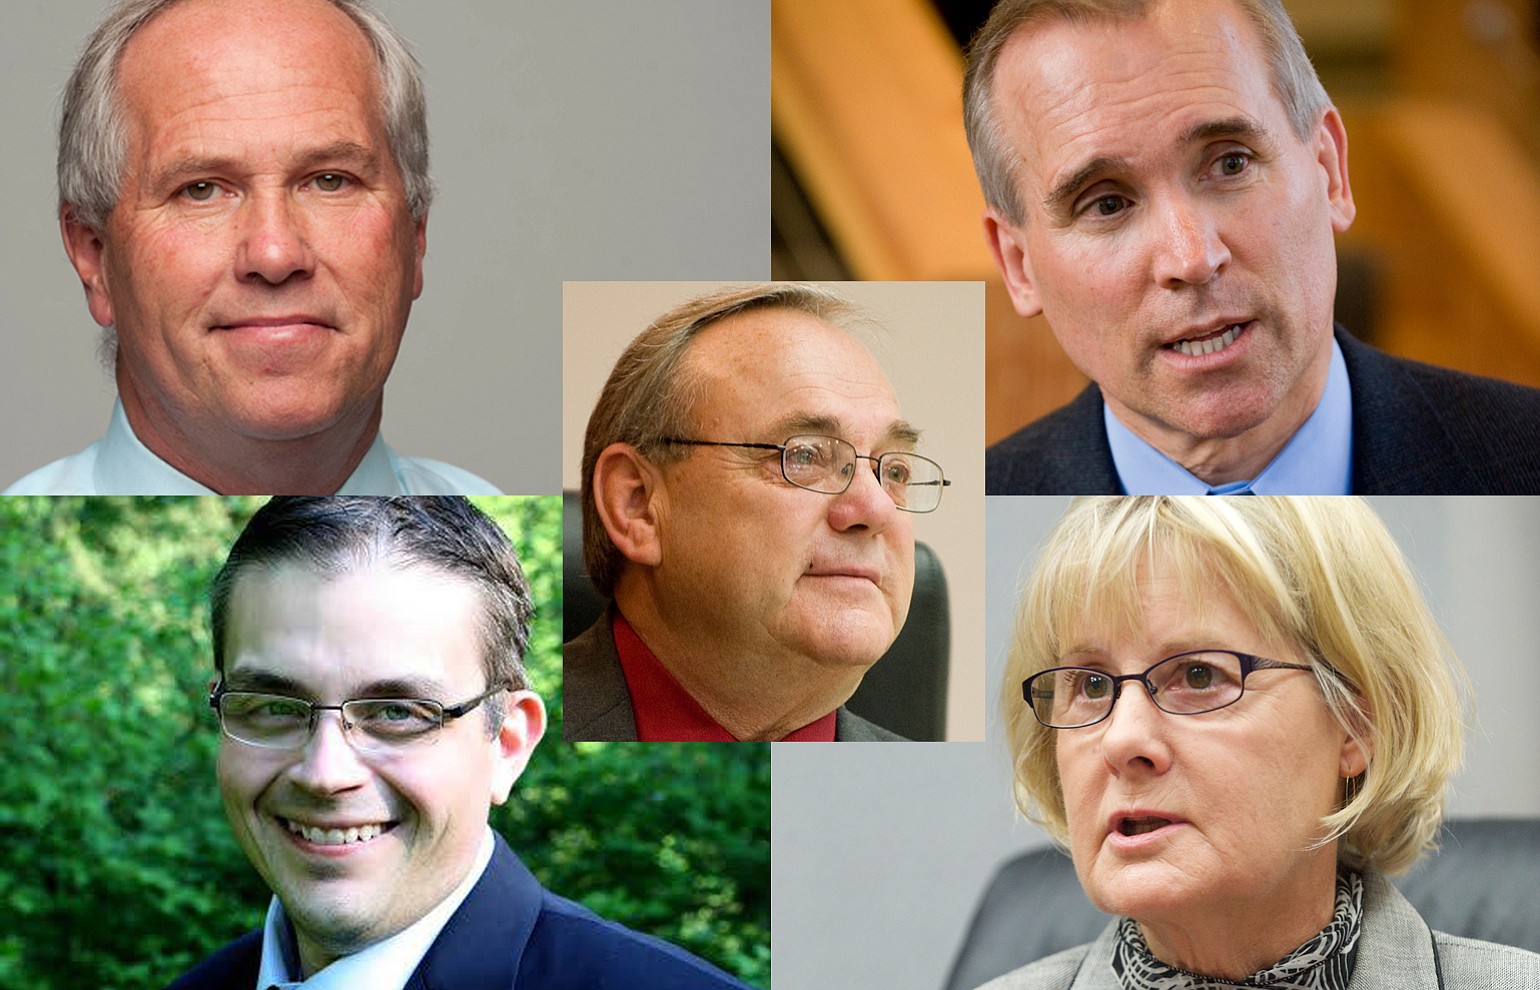 Clark County Council chair candidates, clockwise from top left: Marc Boldt, no party preference; David Madore,
Republican; Jeanne Stewart, Republican; Mike Dalesandro, Democrat; and Tom Mielke, Republican, center.